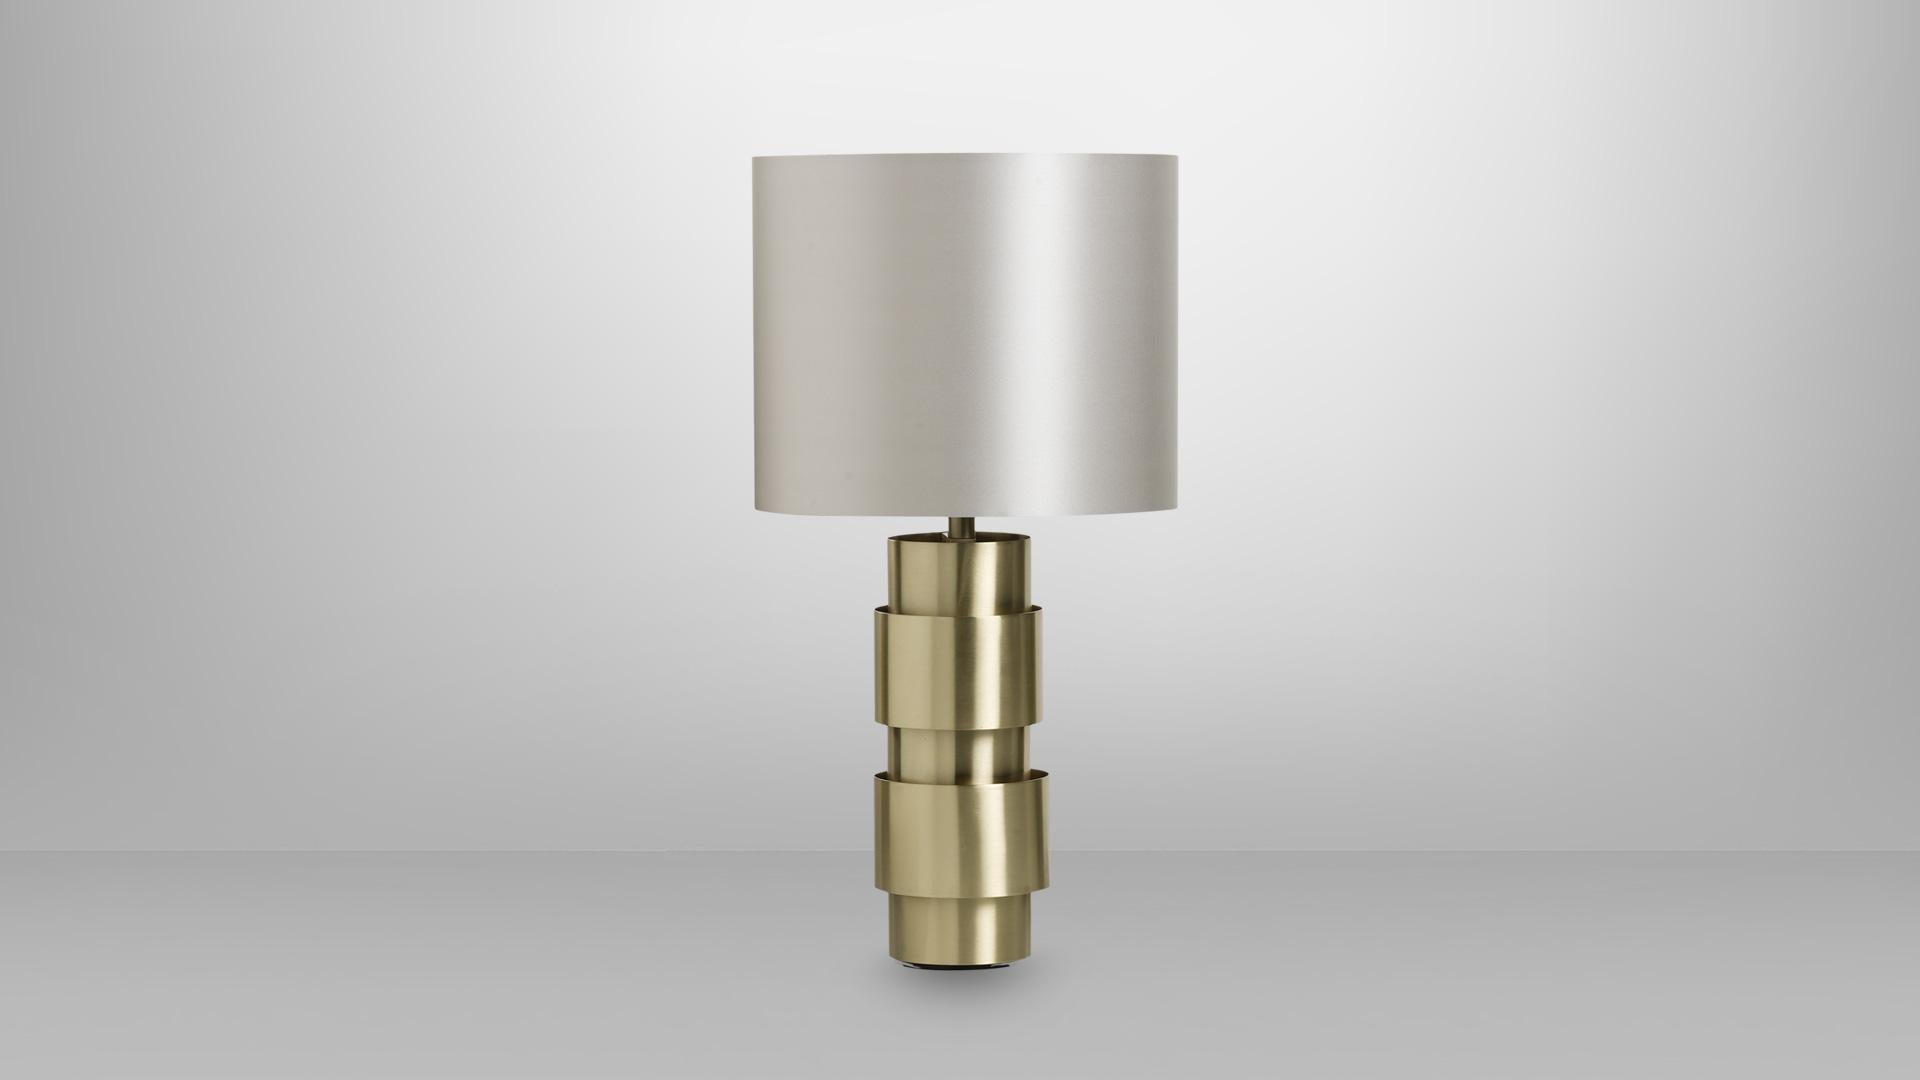 Ring table lamp by CTO Lighting.
Materials: bronze base with dove grey silk shade and silk diffuser.
Also available in satin brass base with dove grey silk shade and silk diffuser.
Dimensions: H 64 x W 30 cm.

All our lamps can be wired